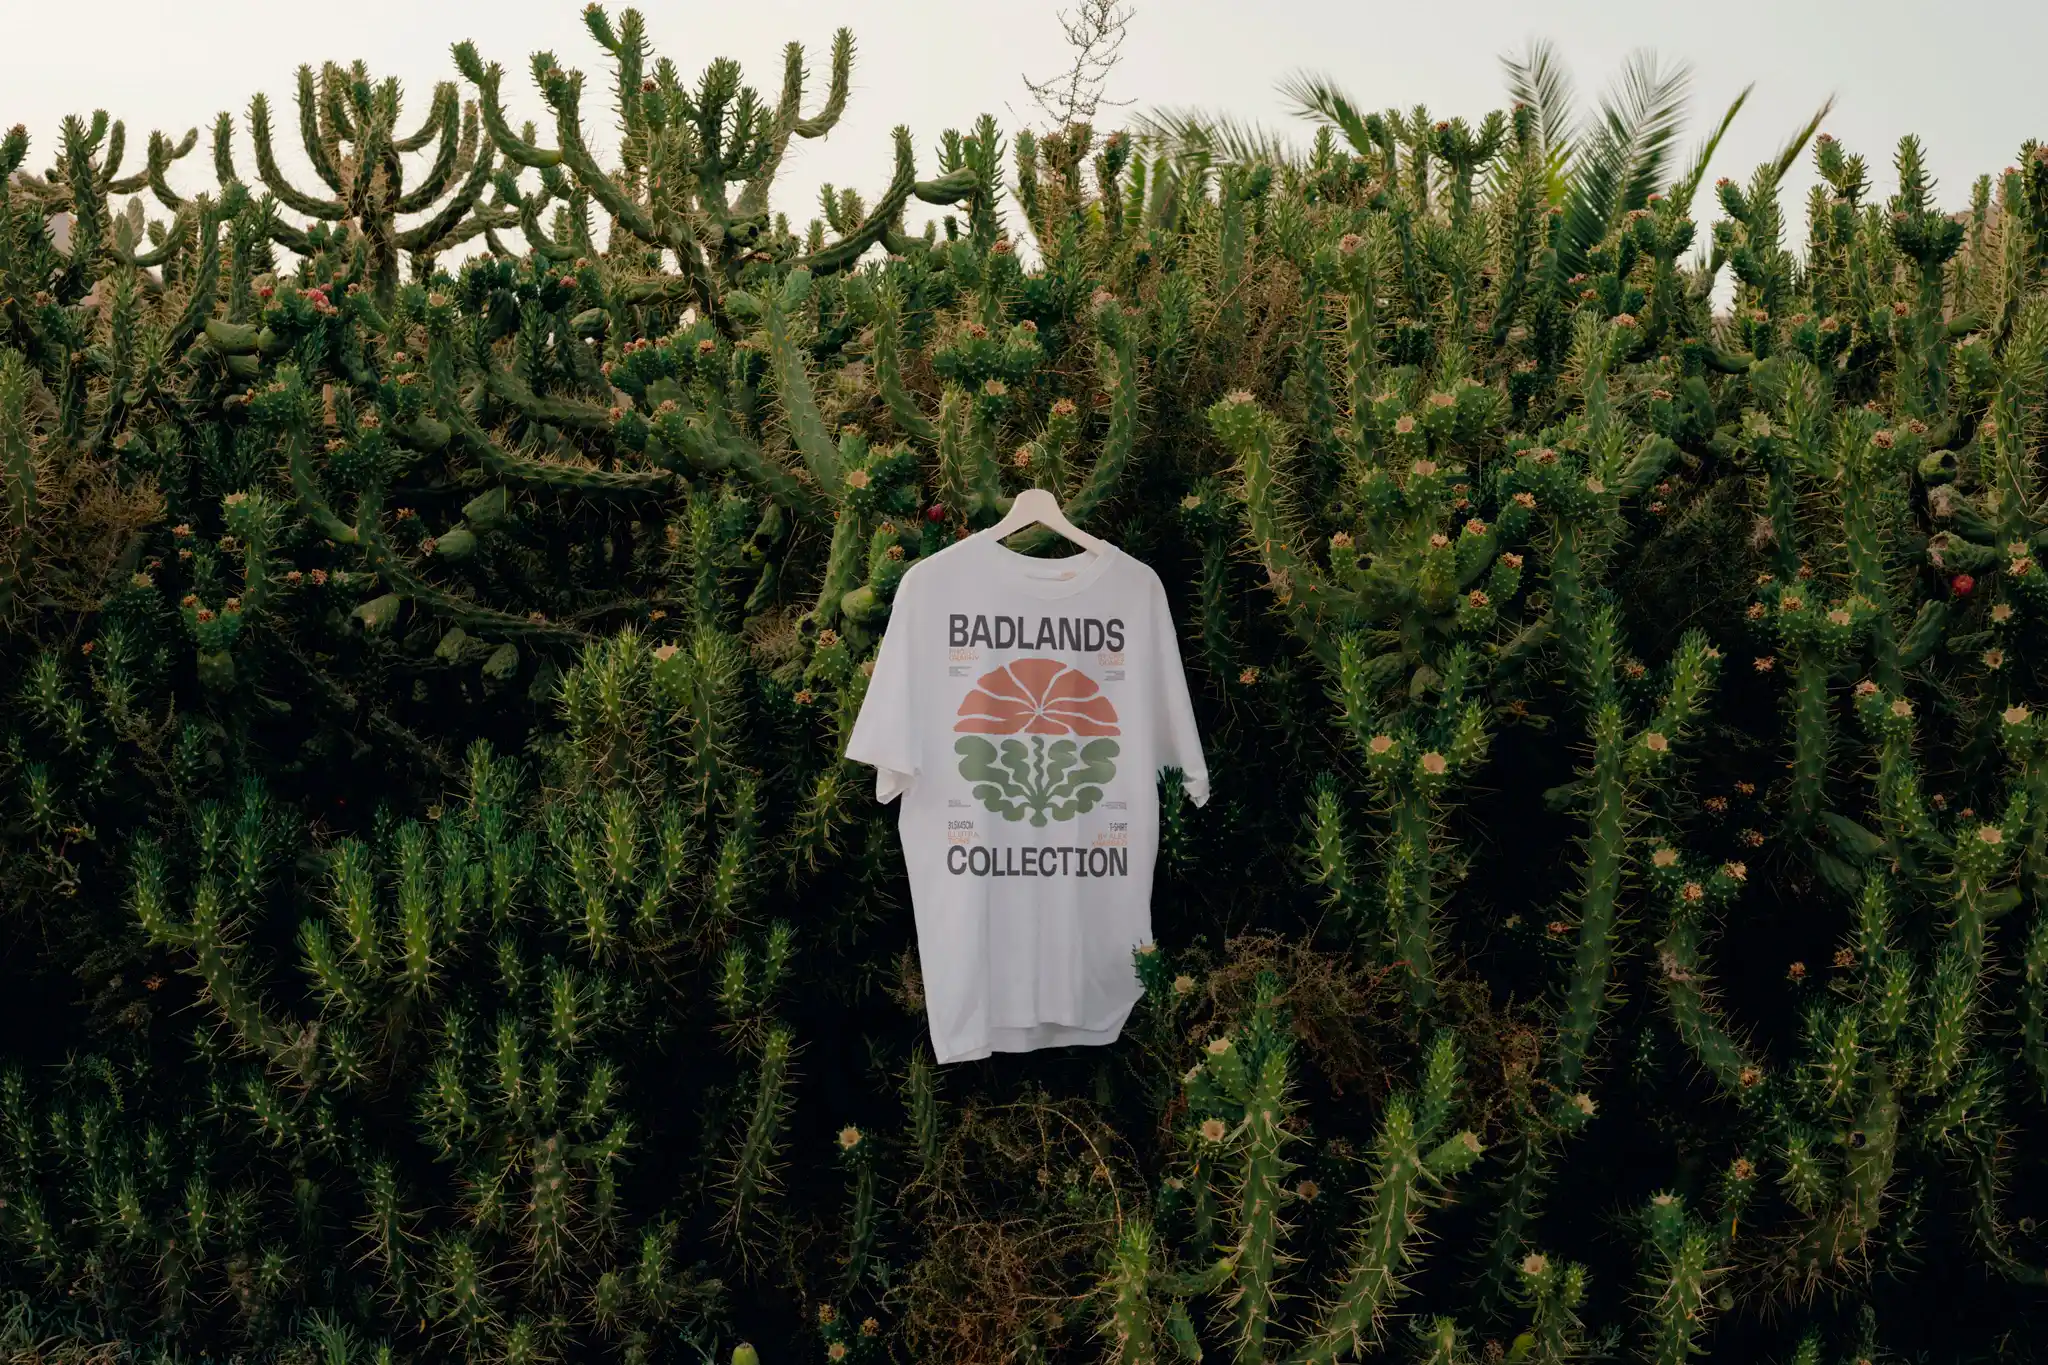 T-shirt mockup freebie in the middle of a bunch of cactus and vegetation.